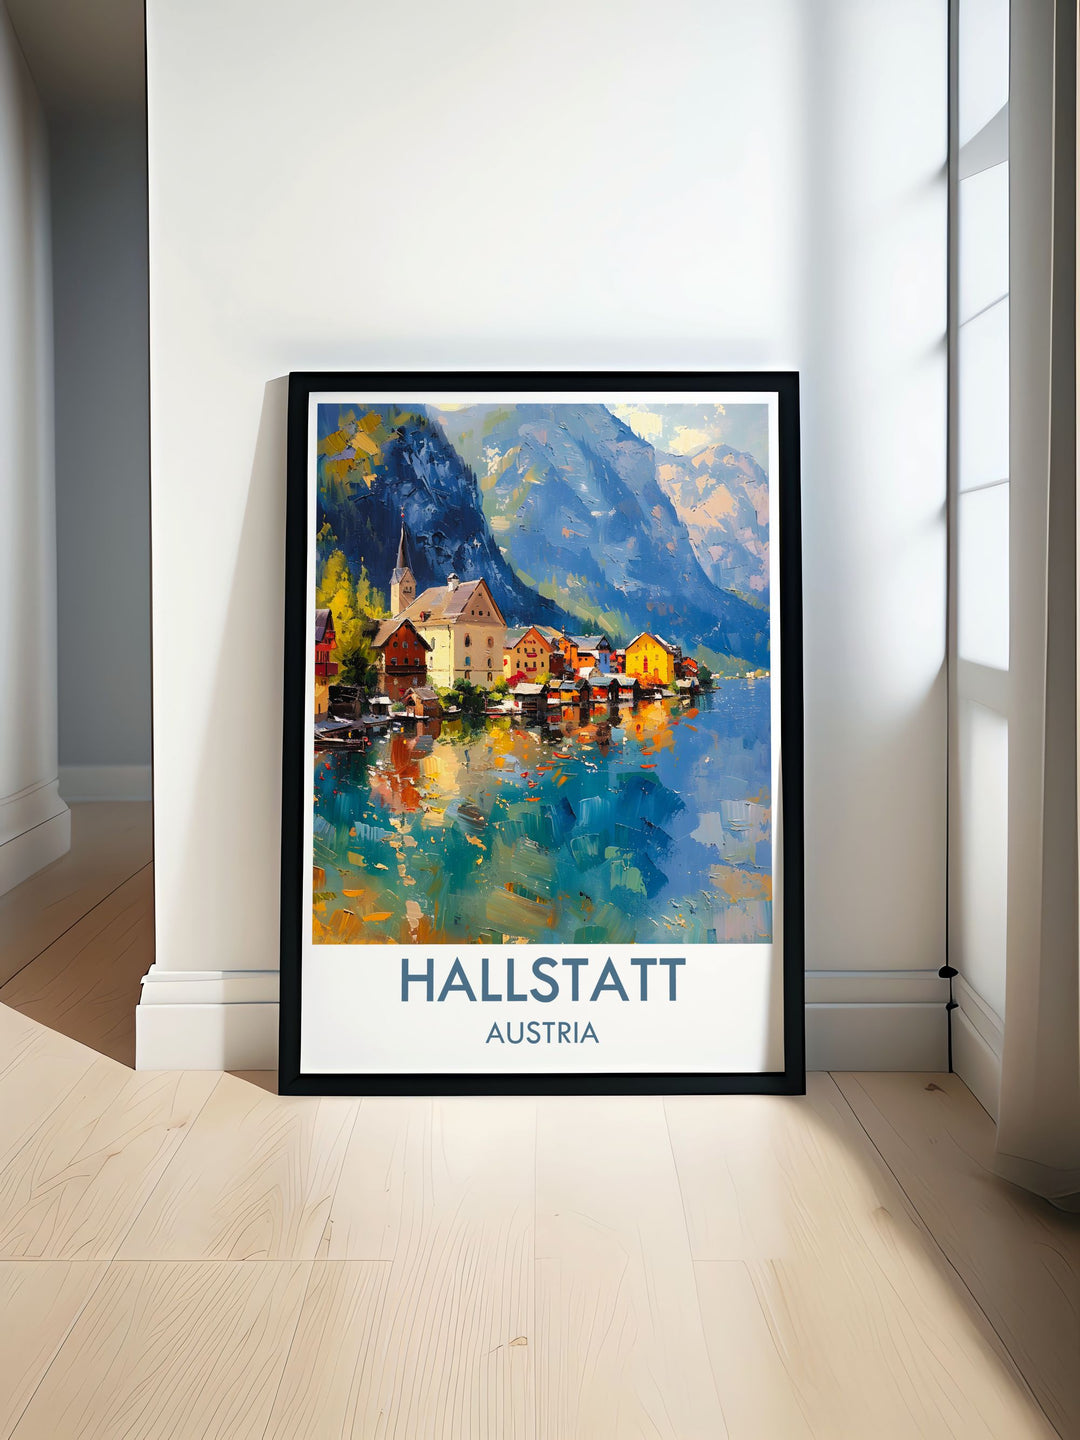 Highlighting the natural beauty of Hallstatt Village, this travel poster offers a glimpse into the fairy tale charm of Austrias most enchanting village, ideal for those who appreciate unique scenic spots.